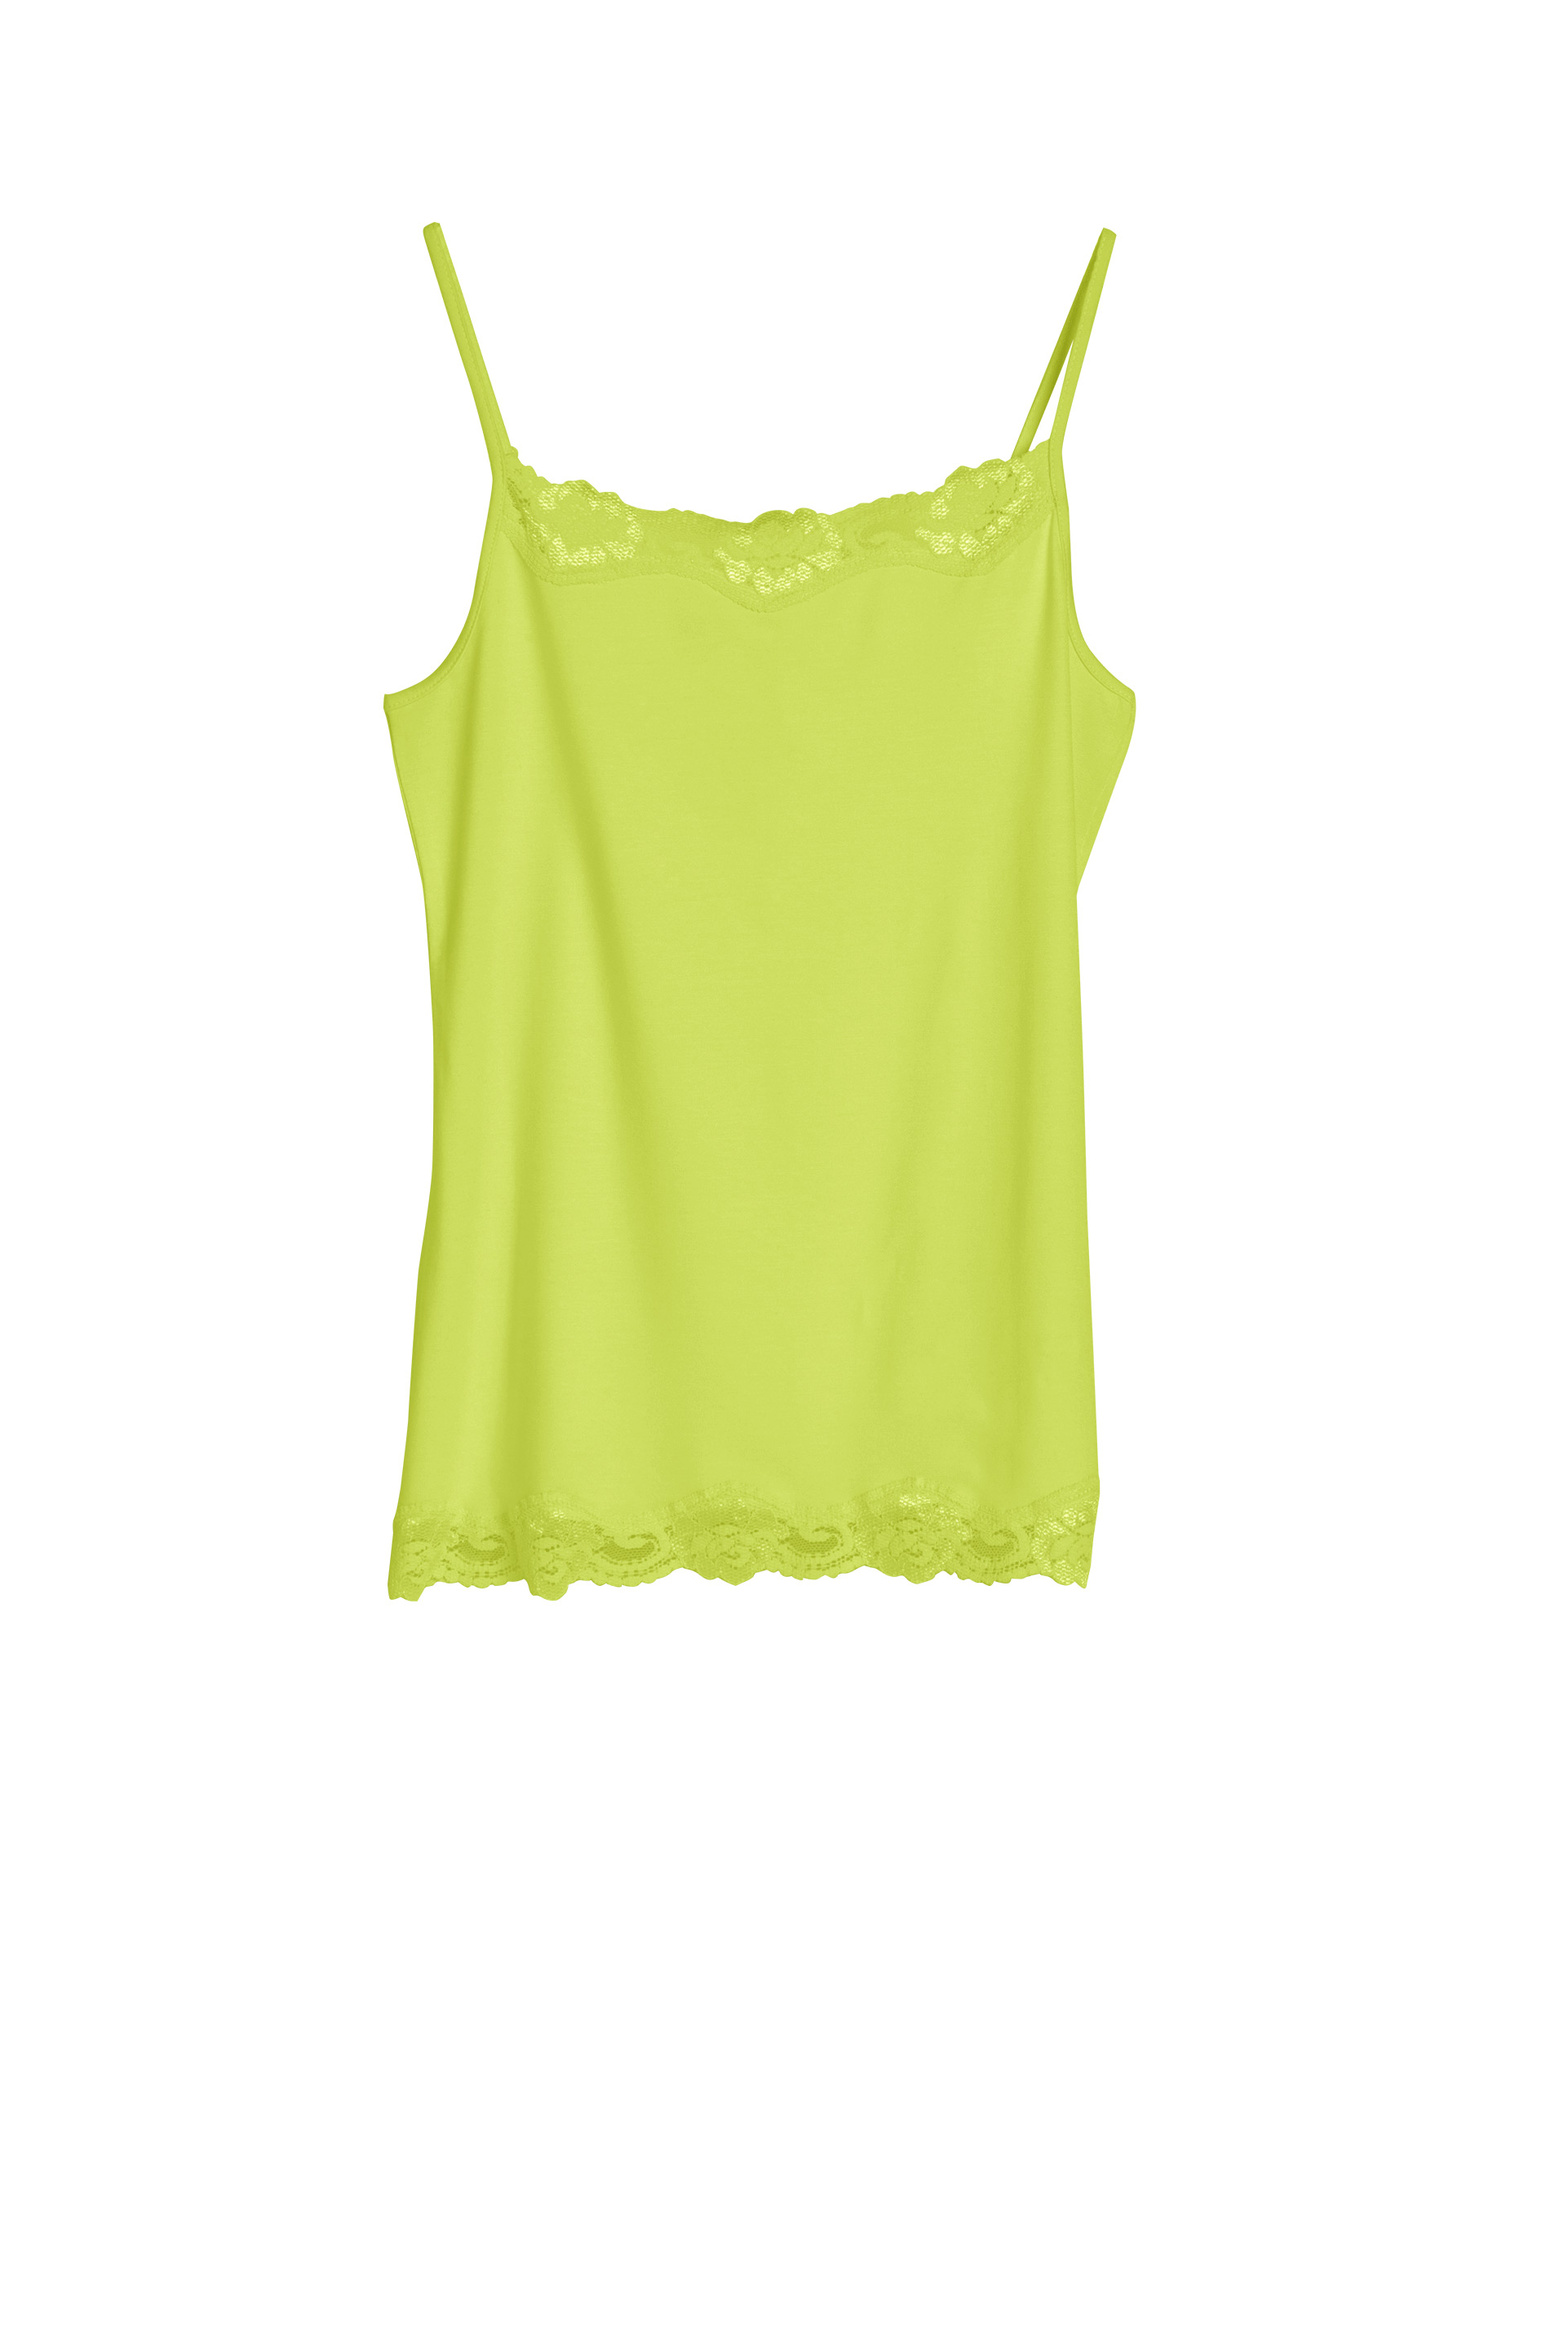 7200_lace_camisole_lime.jpg